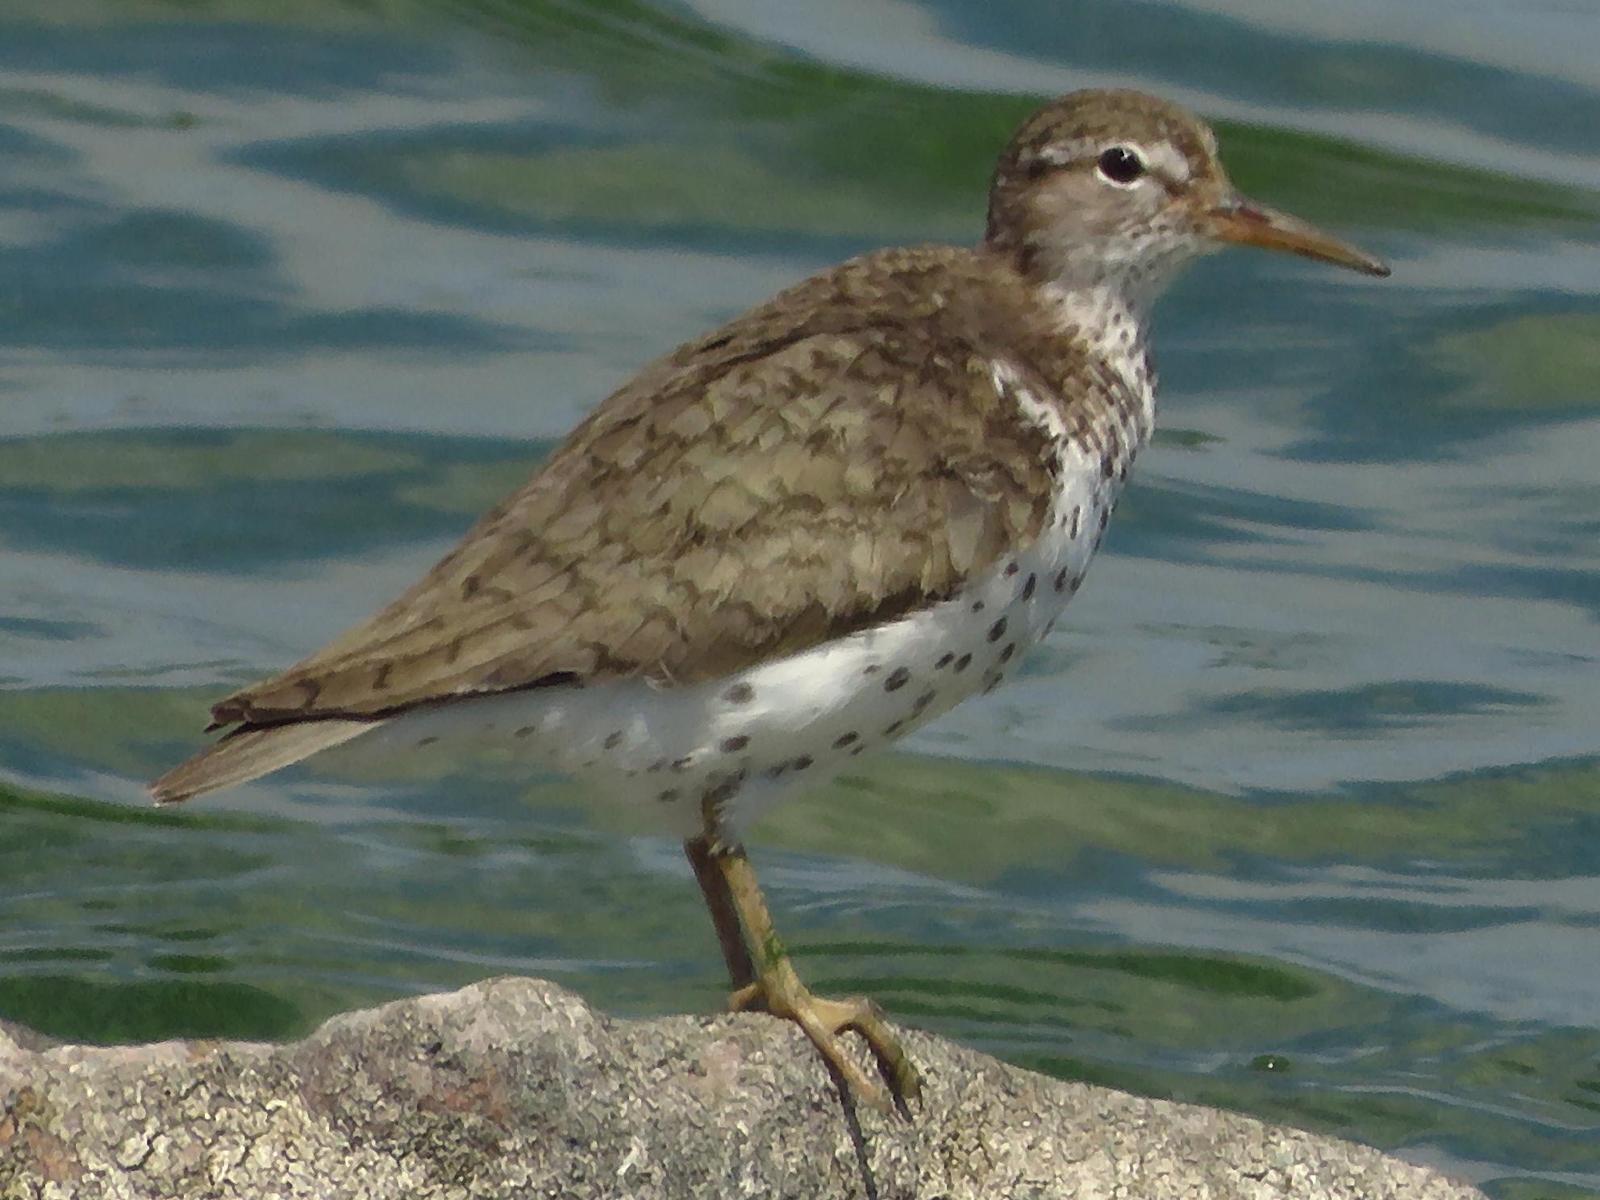 Spotted Sandpiper Photo by Bob Neugebauer